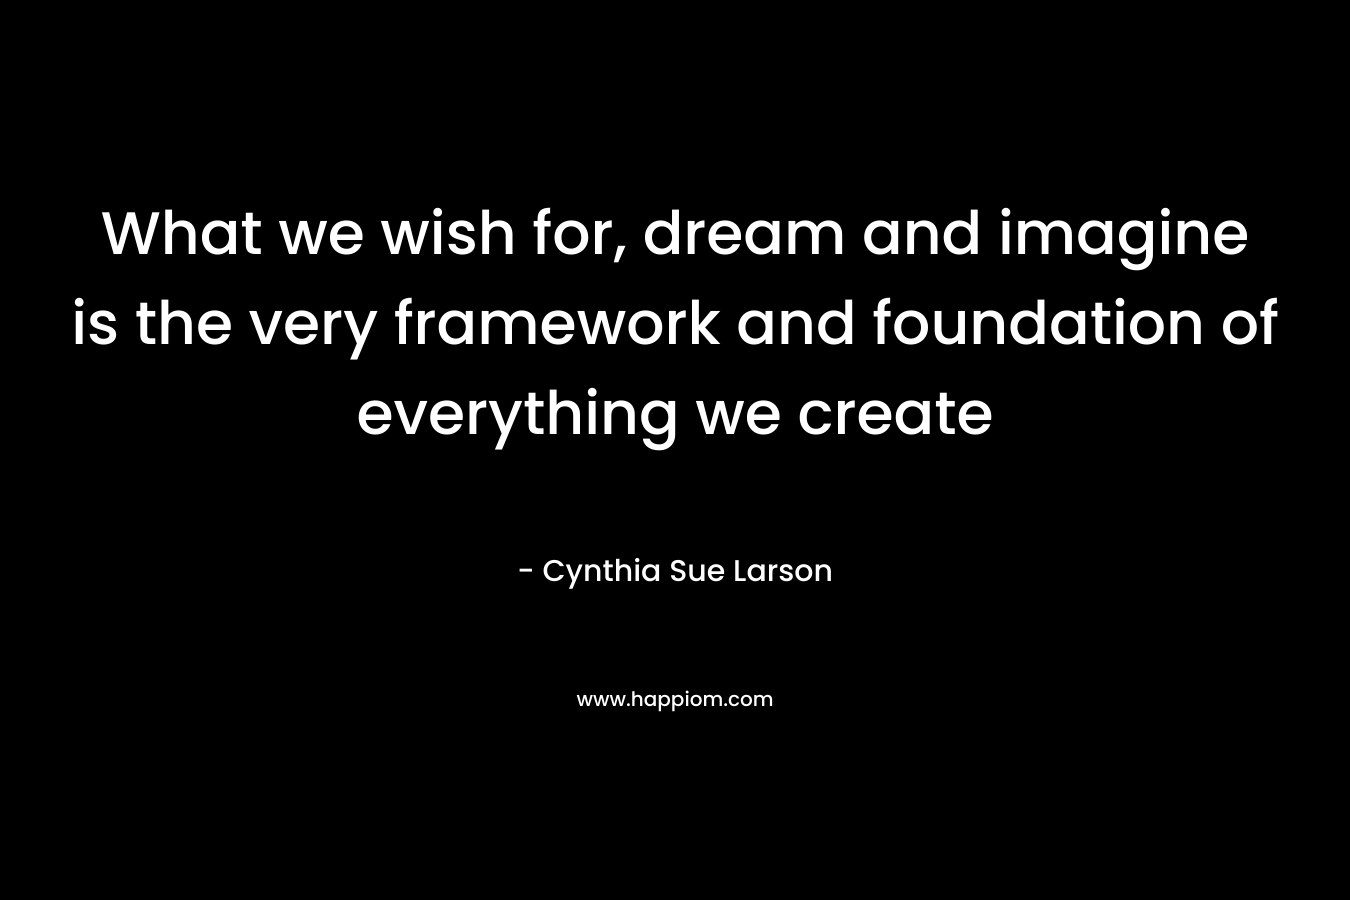 What we wish for, dream and imagine is the very framework and foundation of everything we create